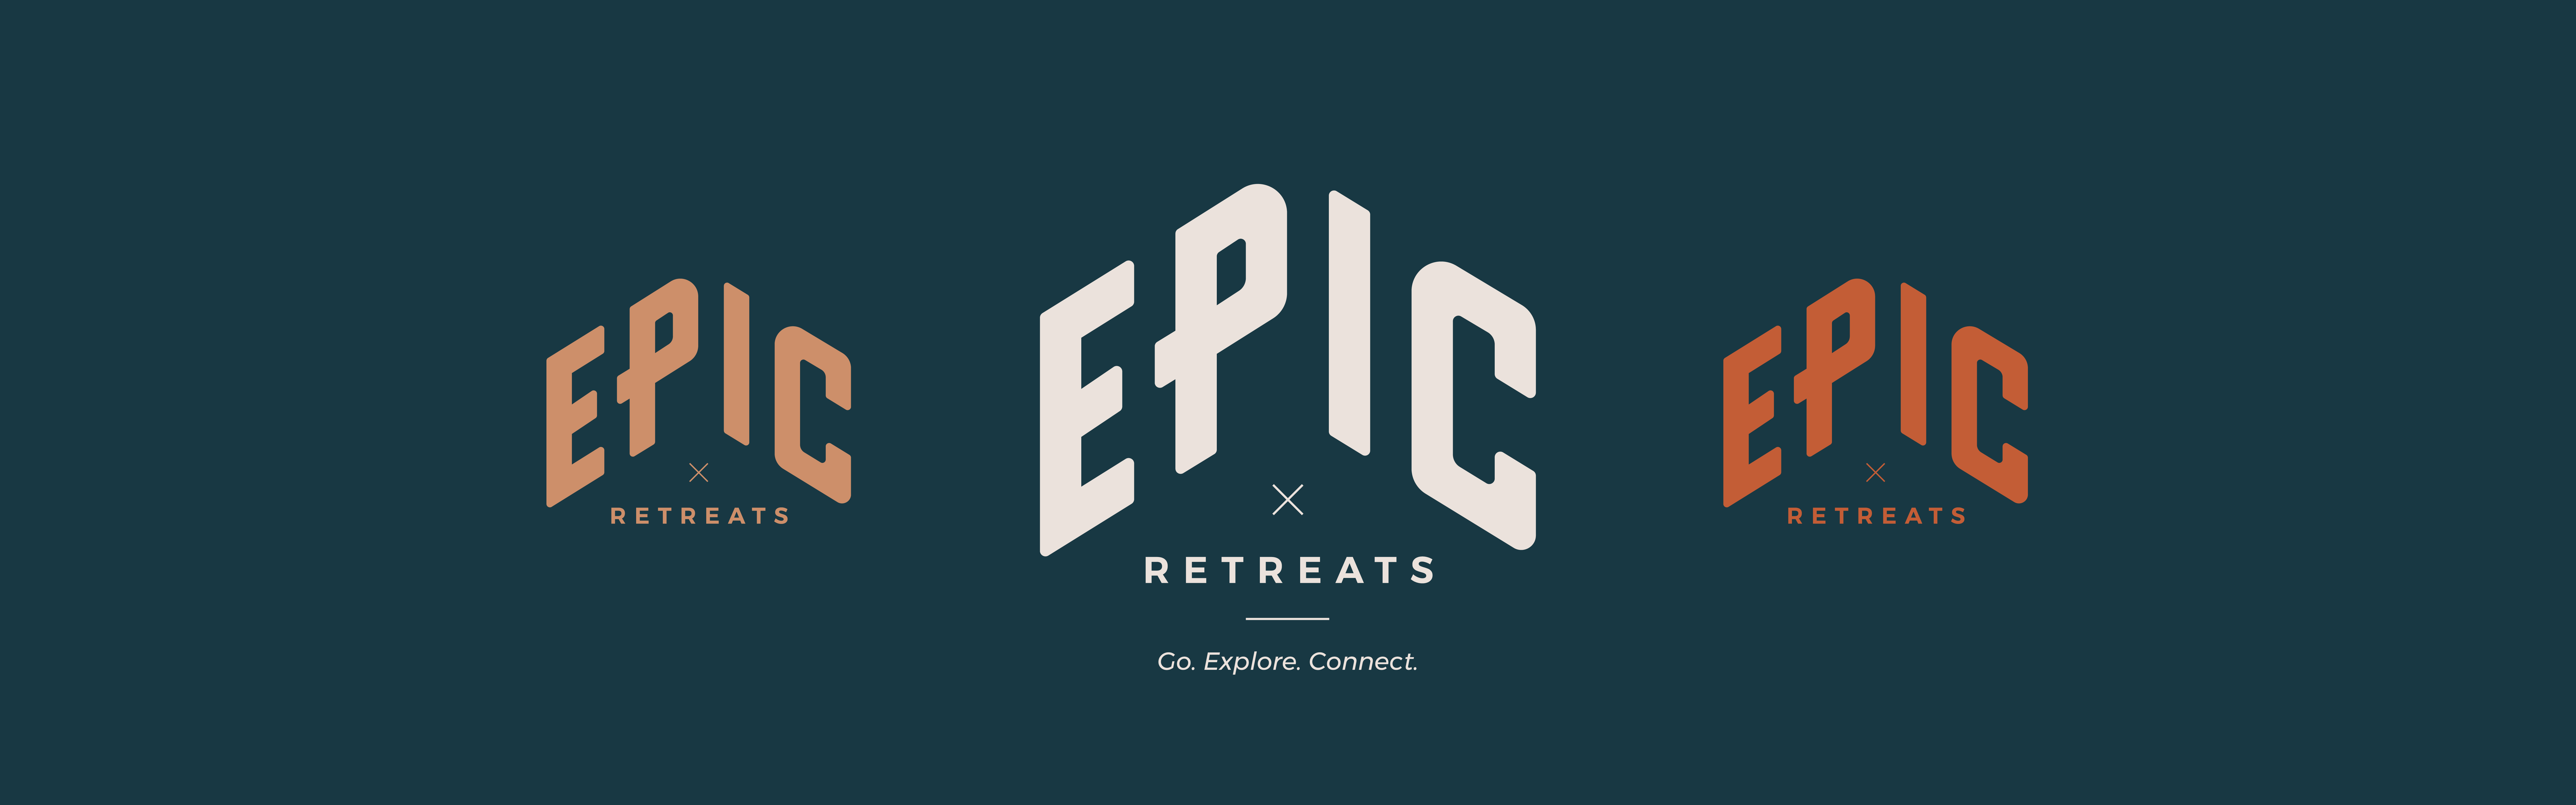 This is a graphic image featuring the stylized text "Epic Retreats" presented in three different font variations. The colors used are white and orange against a dark blue background, and there is.